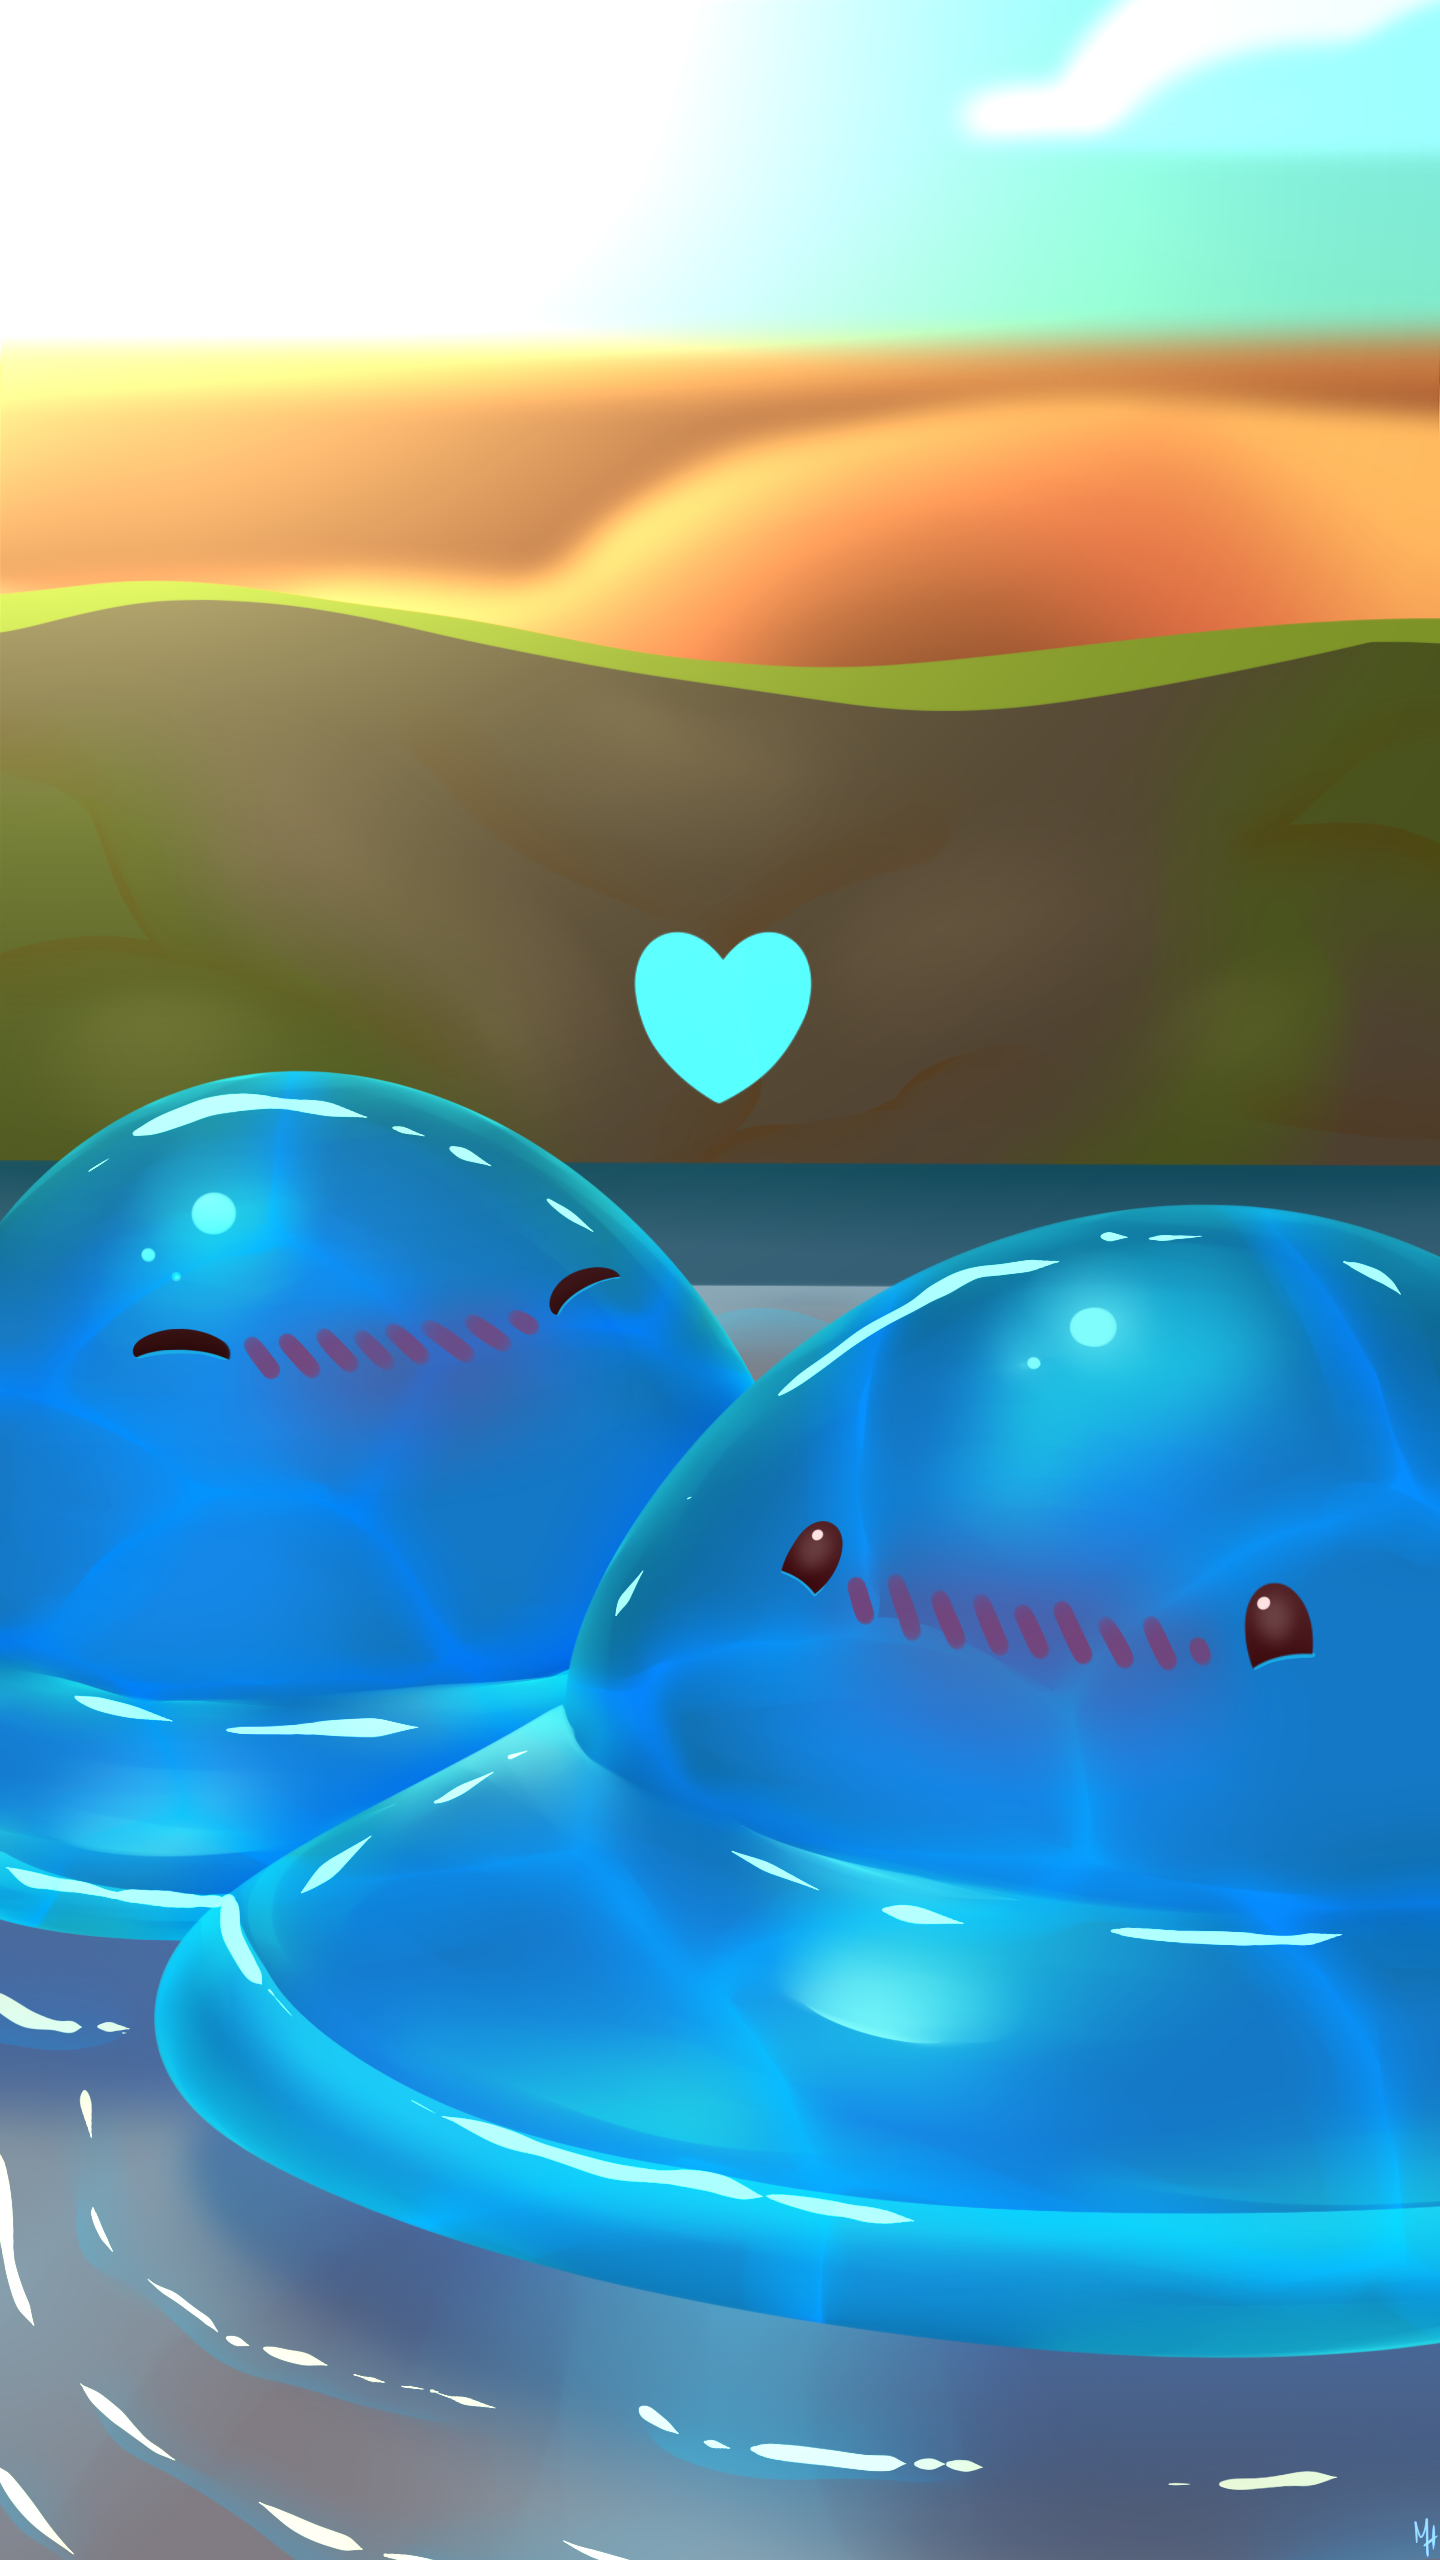 Puddle Slime Phone Wallpaper! (Made by me)